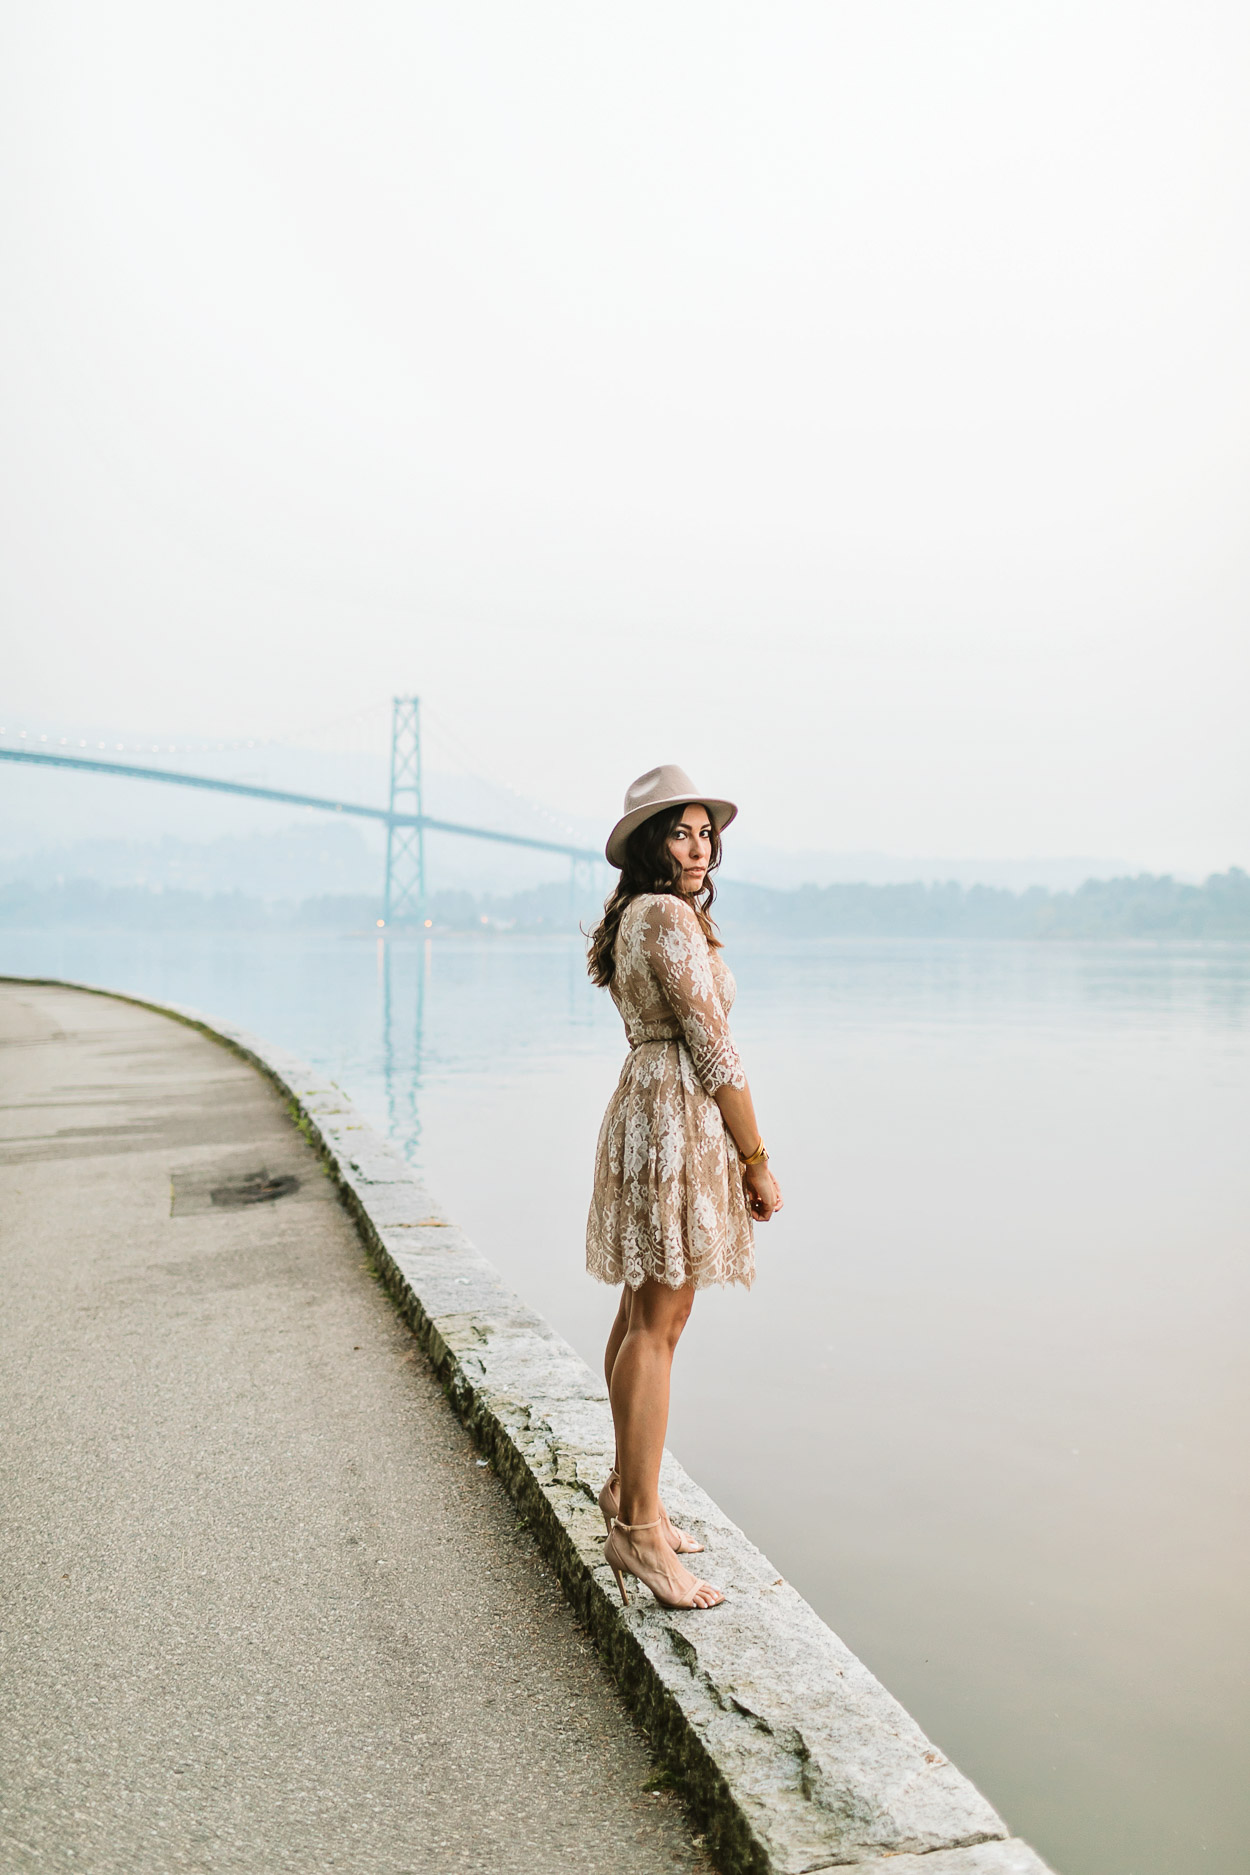 The best things to do in Vancouver are picked by fashion blogger Amanda of A Glam Lifestyle